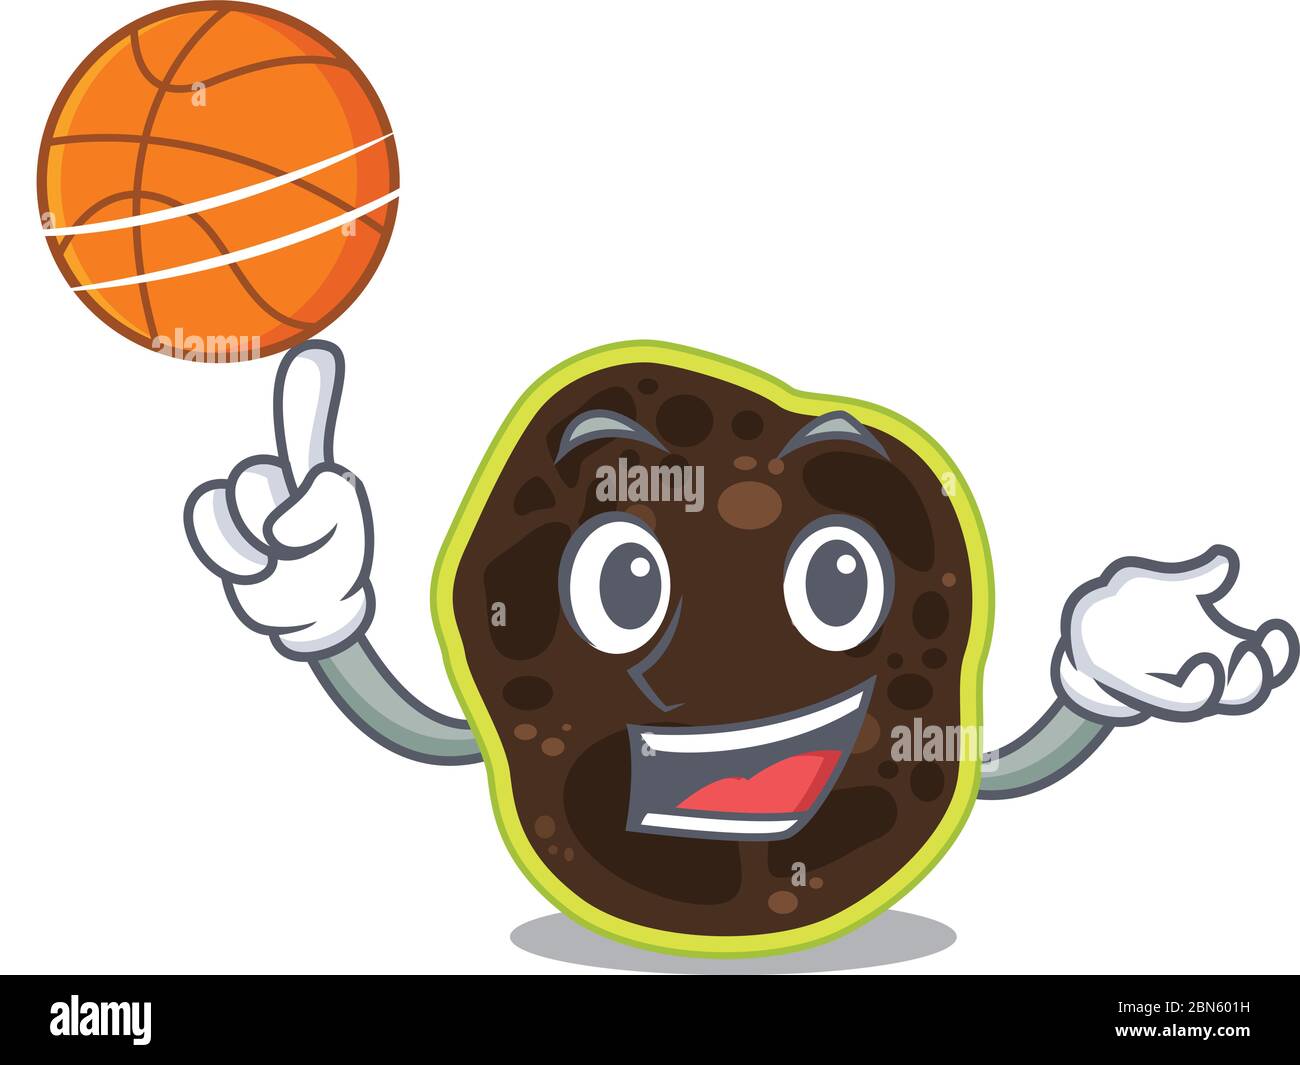 Sporty cartoon mascot design of firmicutes with basketball Stock Vector